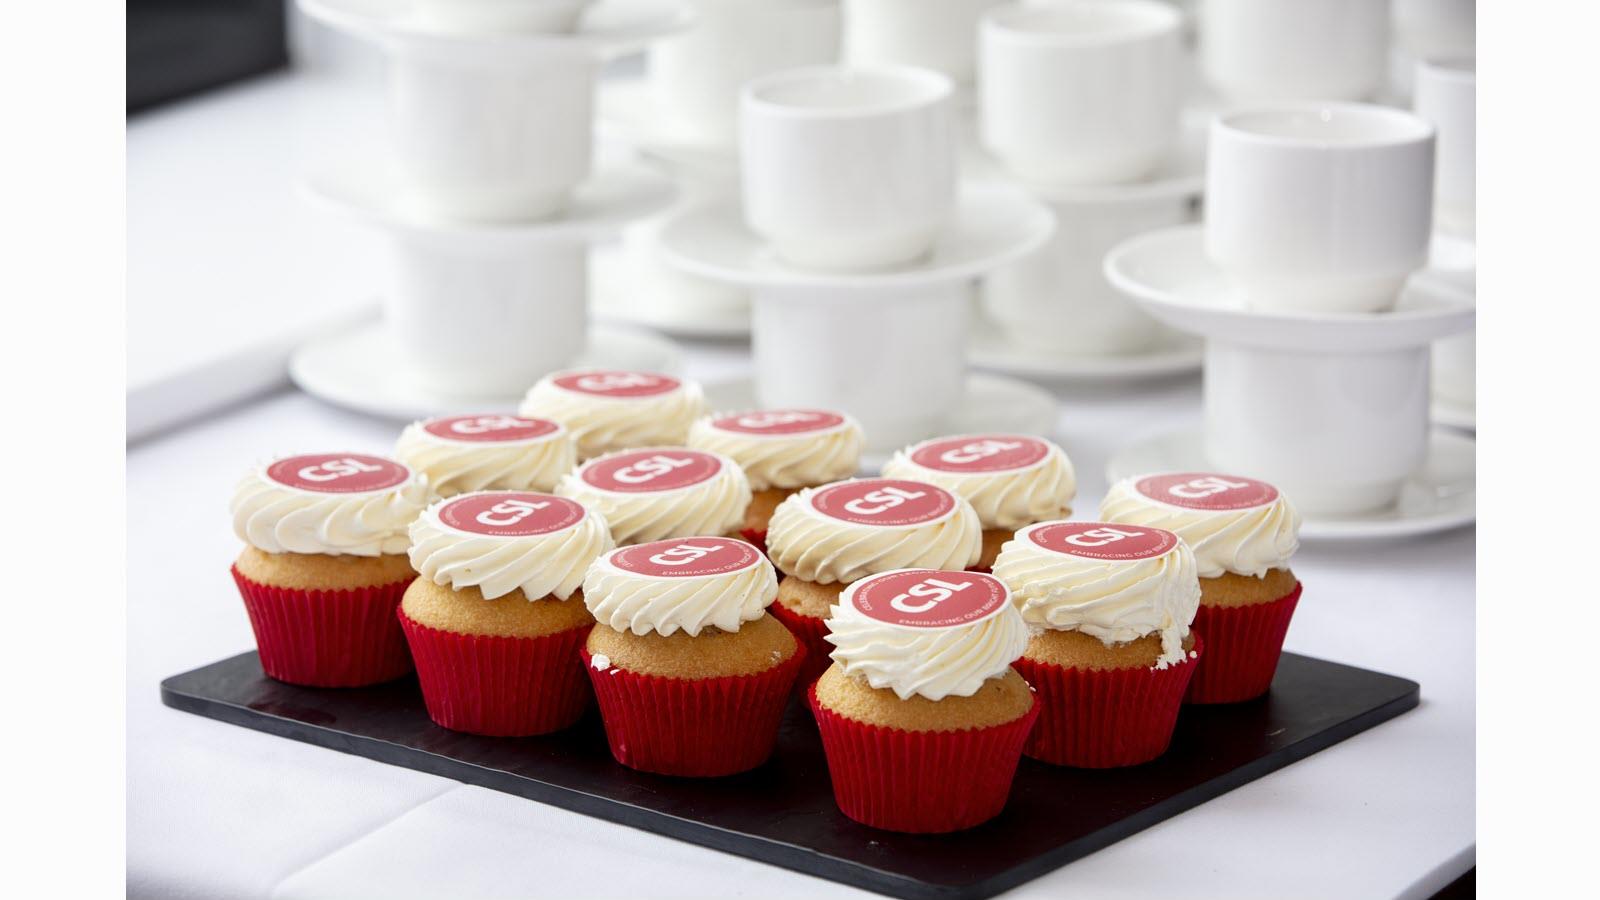 CSL cupcakes with the company's red logo